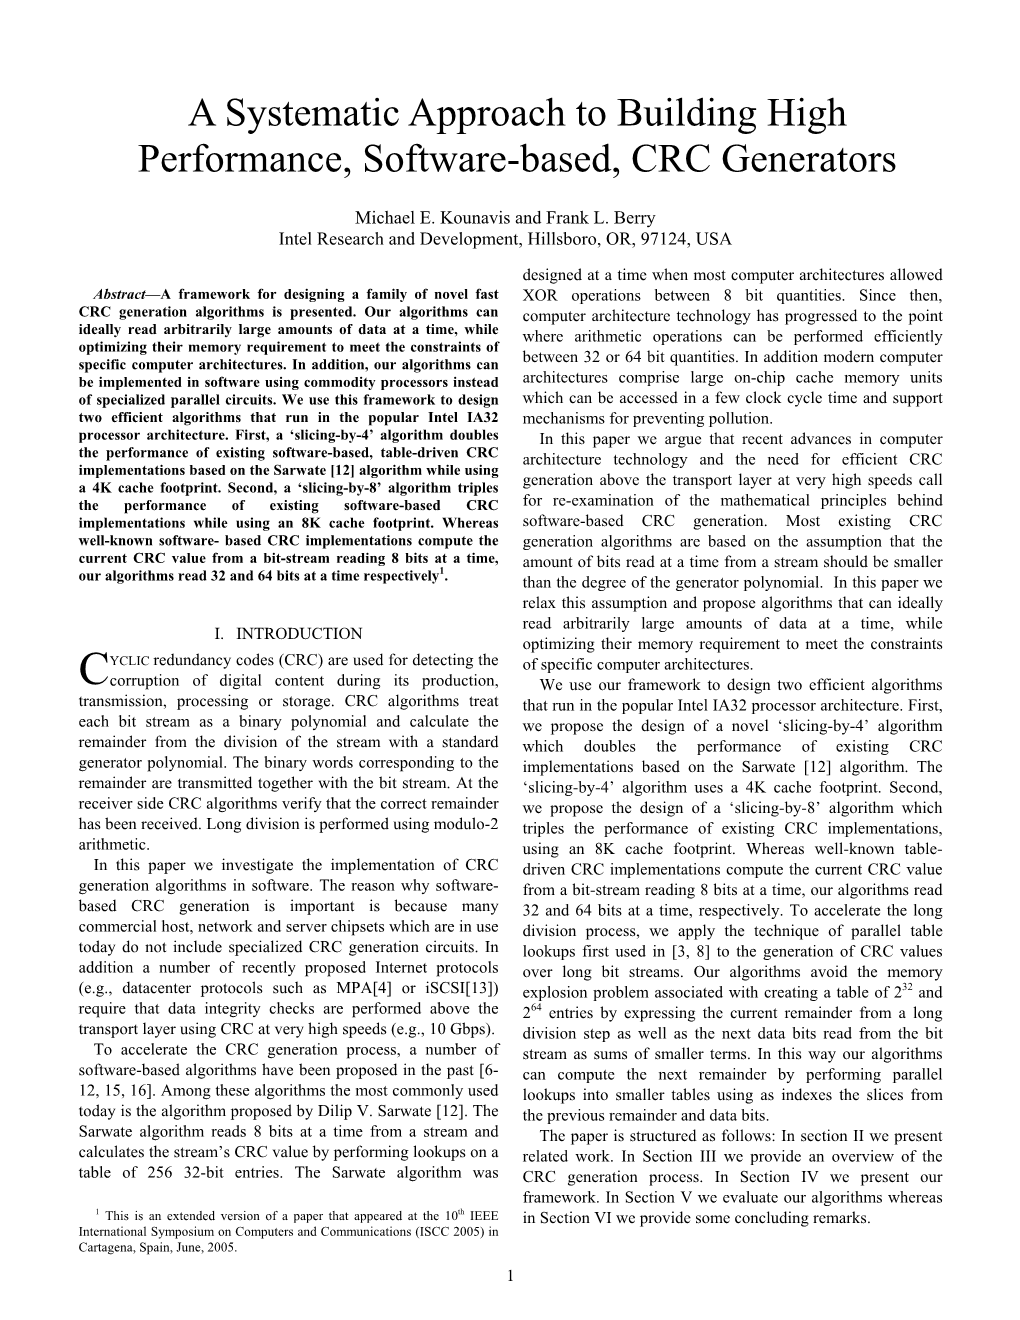 A Systematic Approach to Building High Performance, Software-Based, CRC Generators